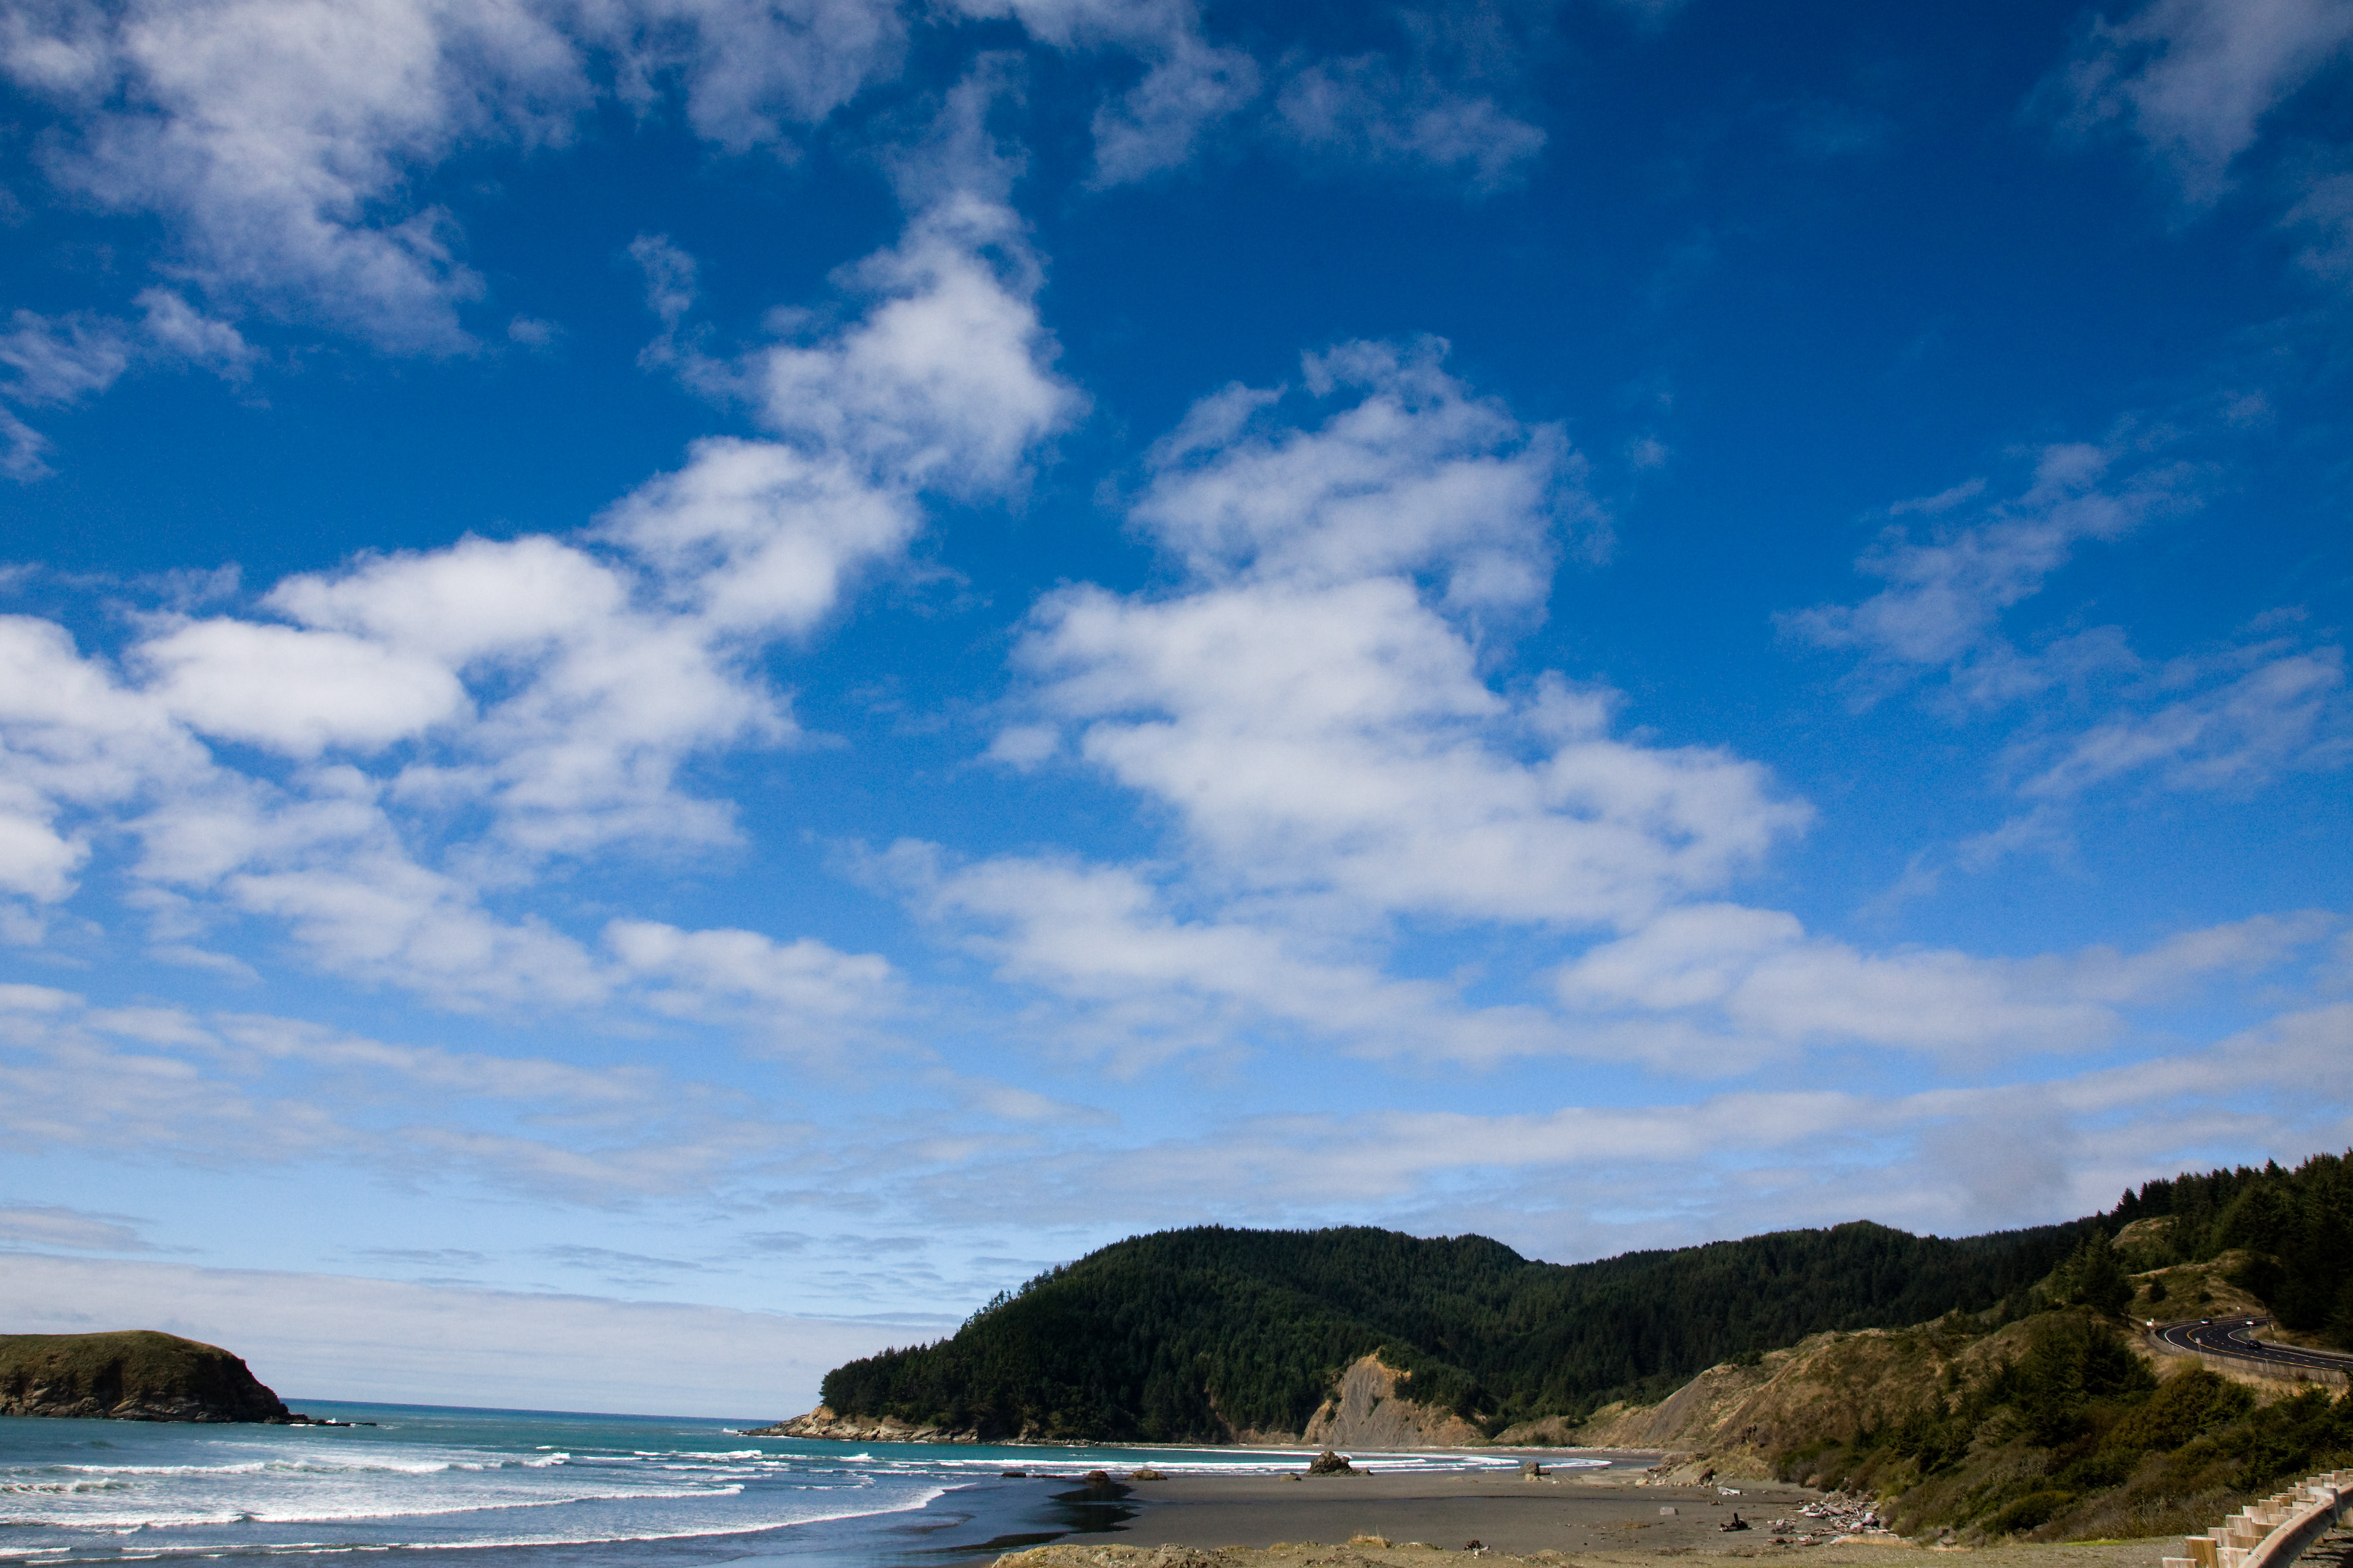 A view of deep blue sky with white fluffy clouds over a hill with a road winding down on the right side. The ocean is on the left with waves crashing ashore.